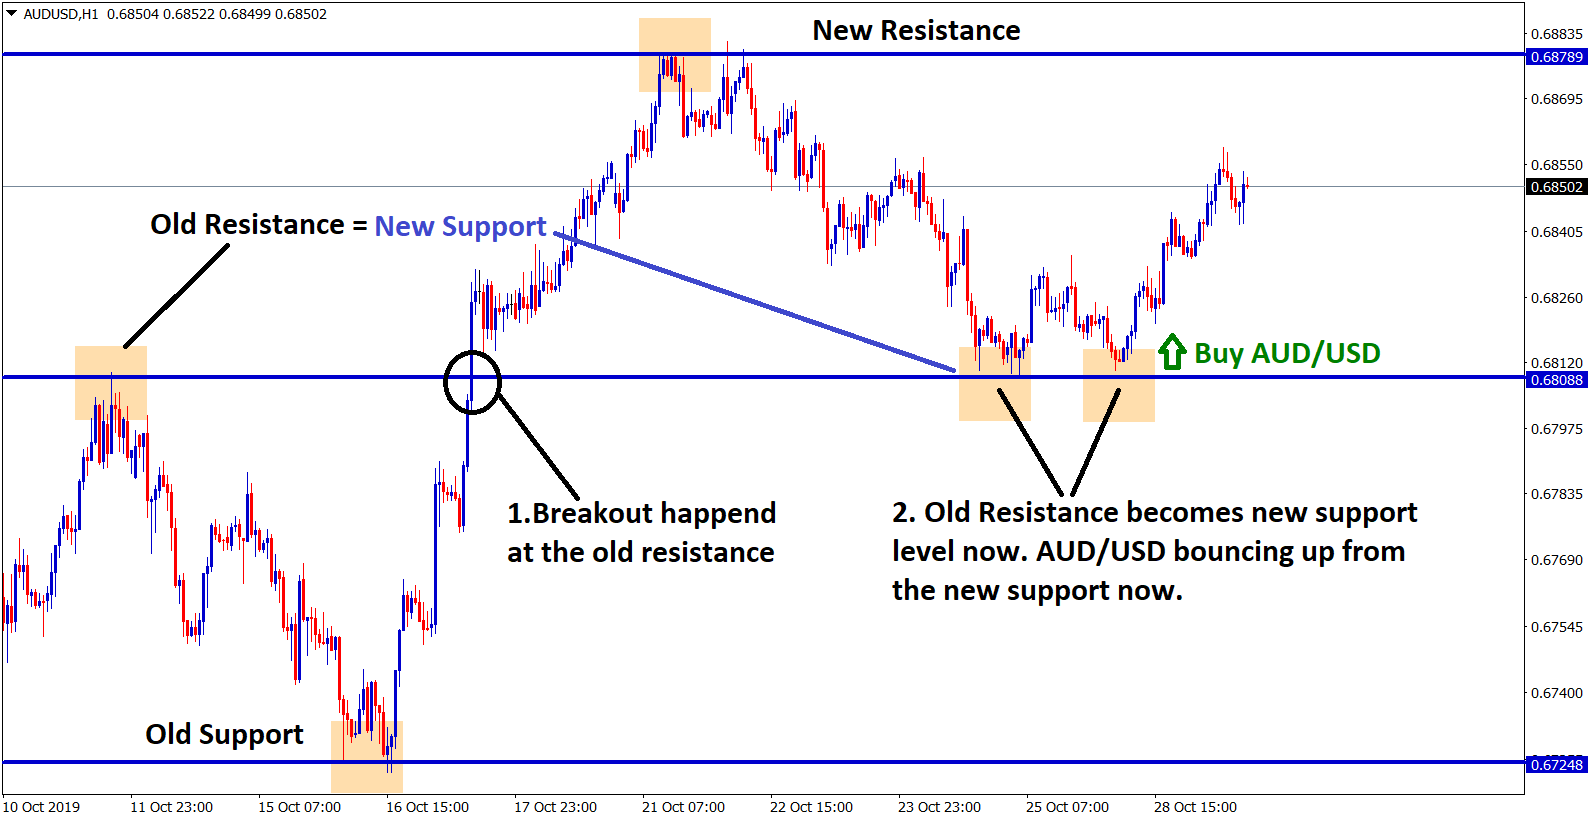 AUD USD bouncing up from new support level (old resistance =new support )